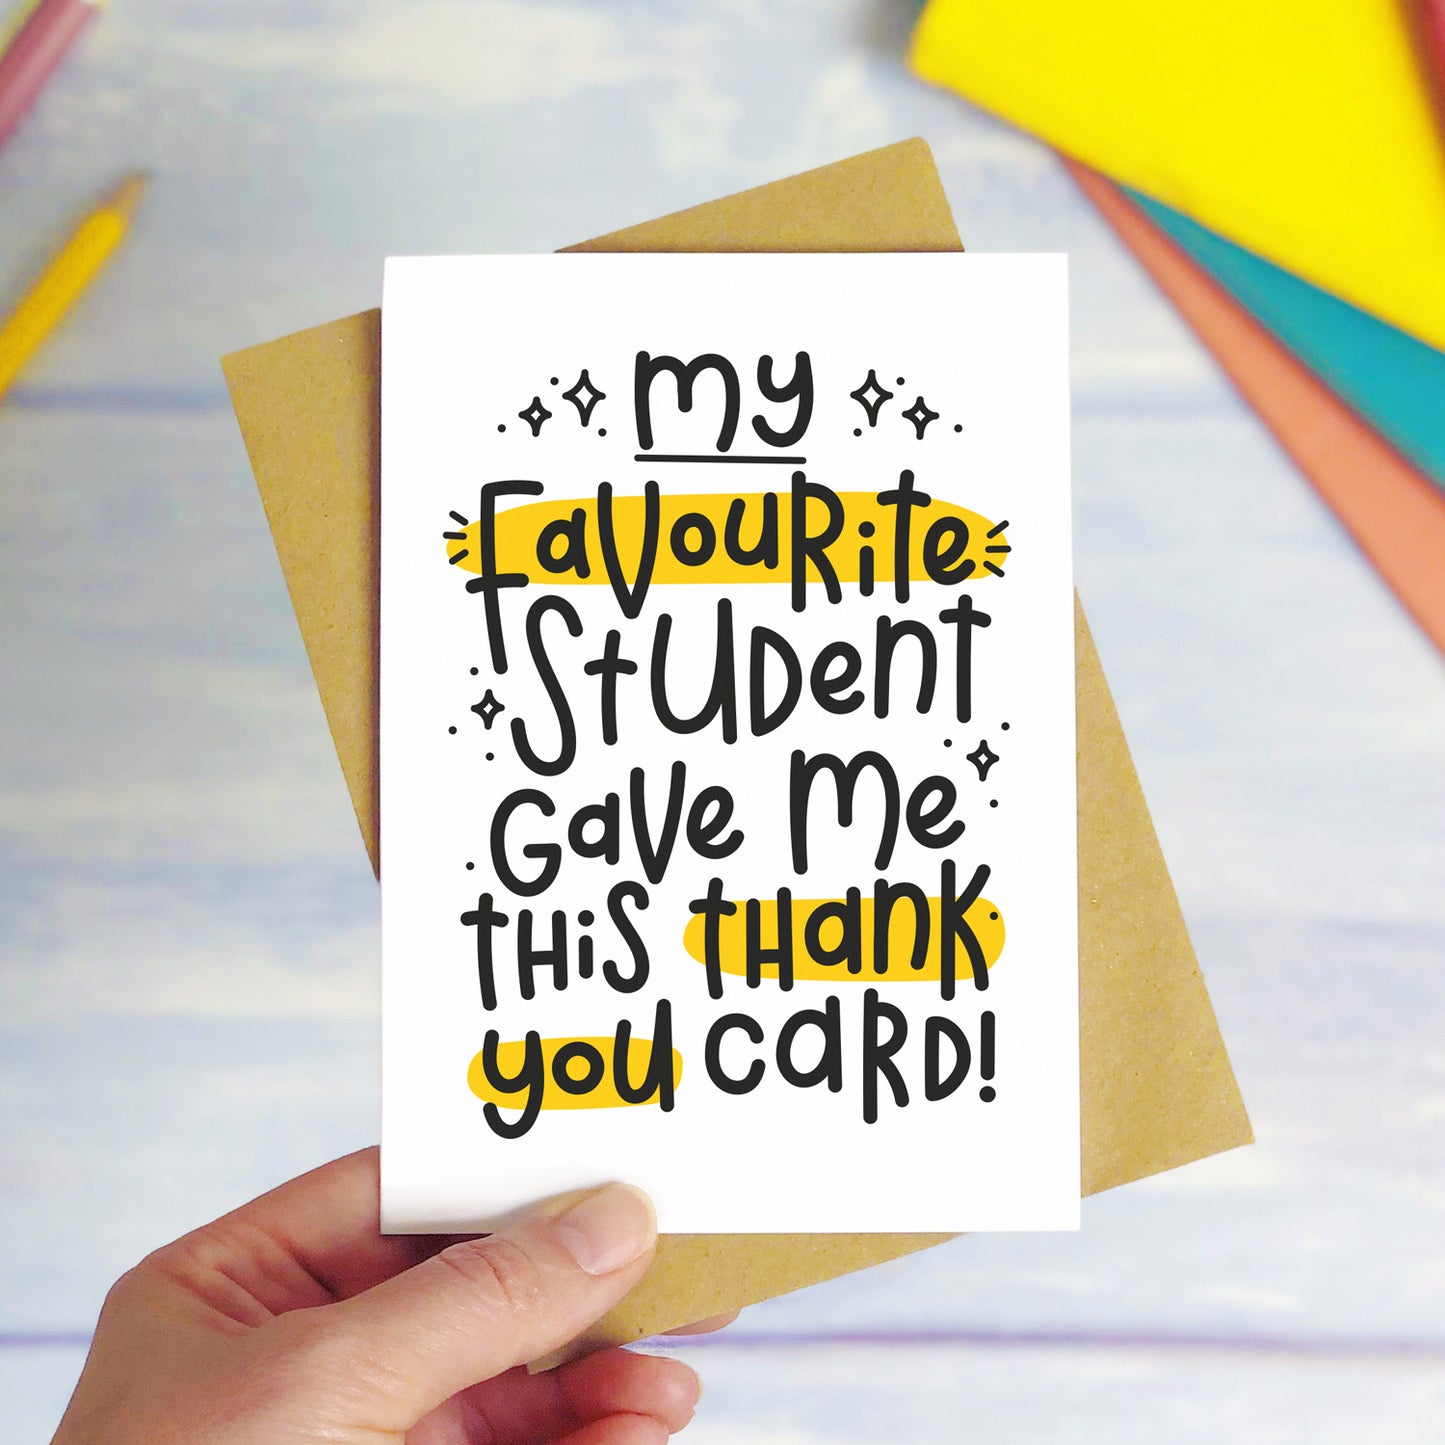 A favourite student thank you teacher card held over a purple surface with colourful text books in the background. The card reads "my favourite student gave me this thank you card!"